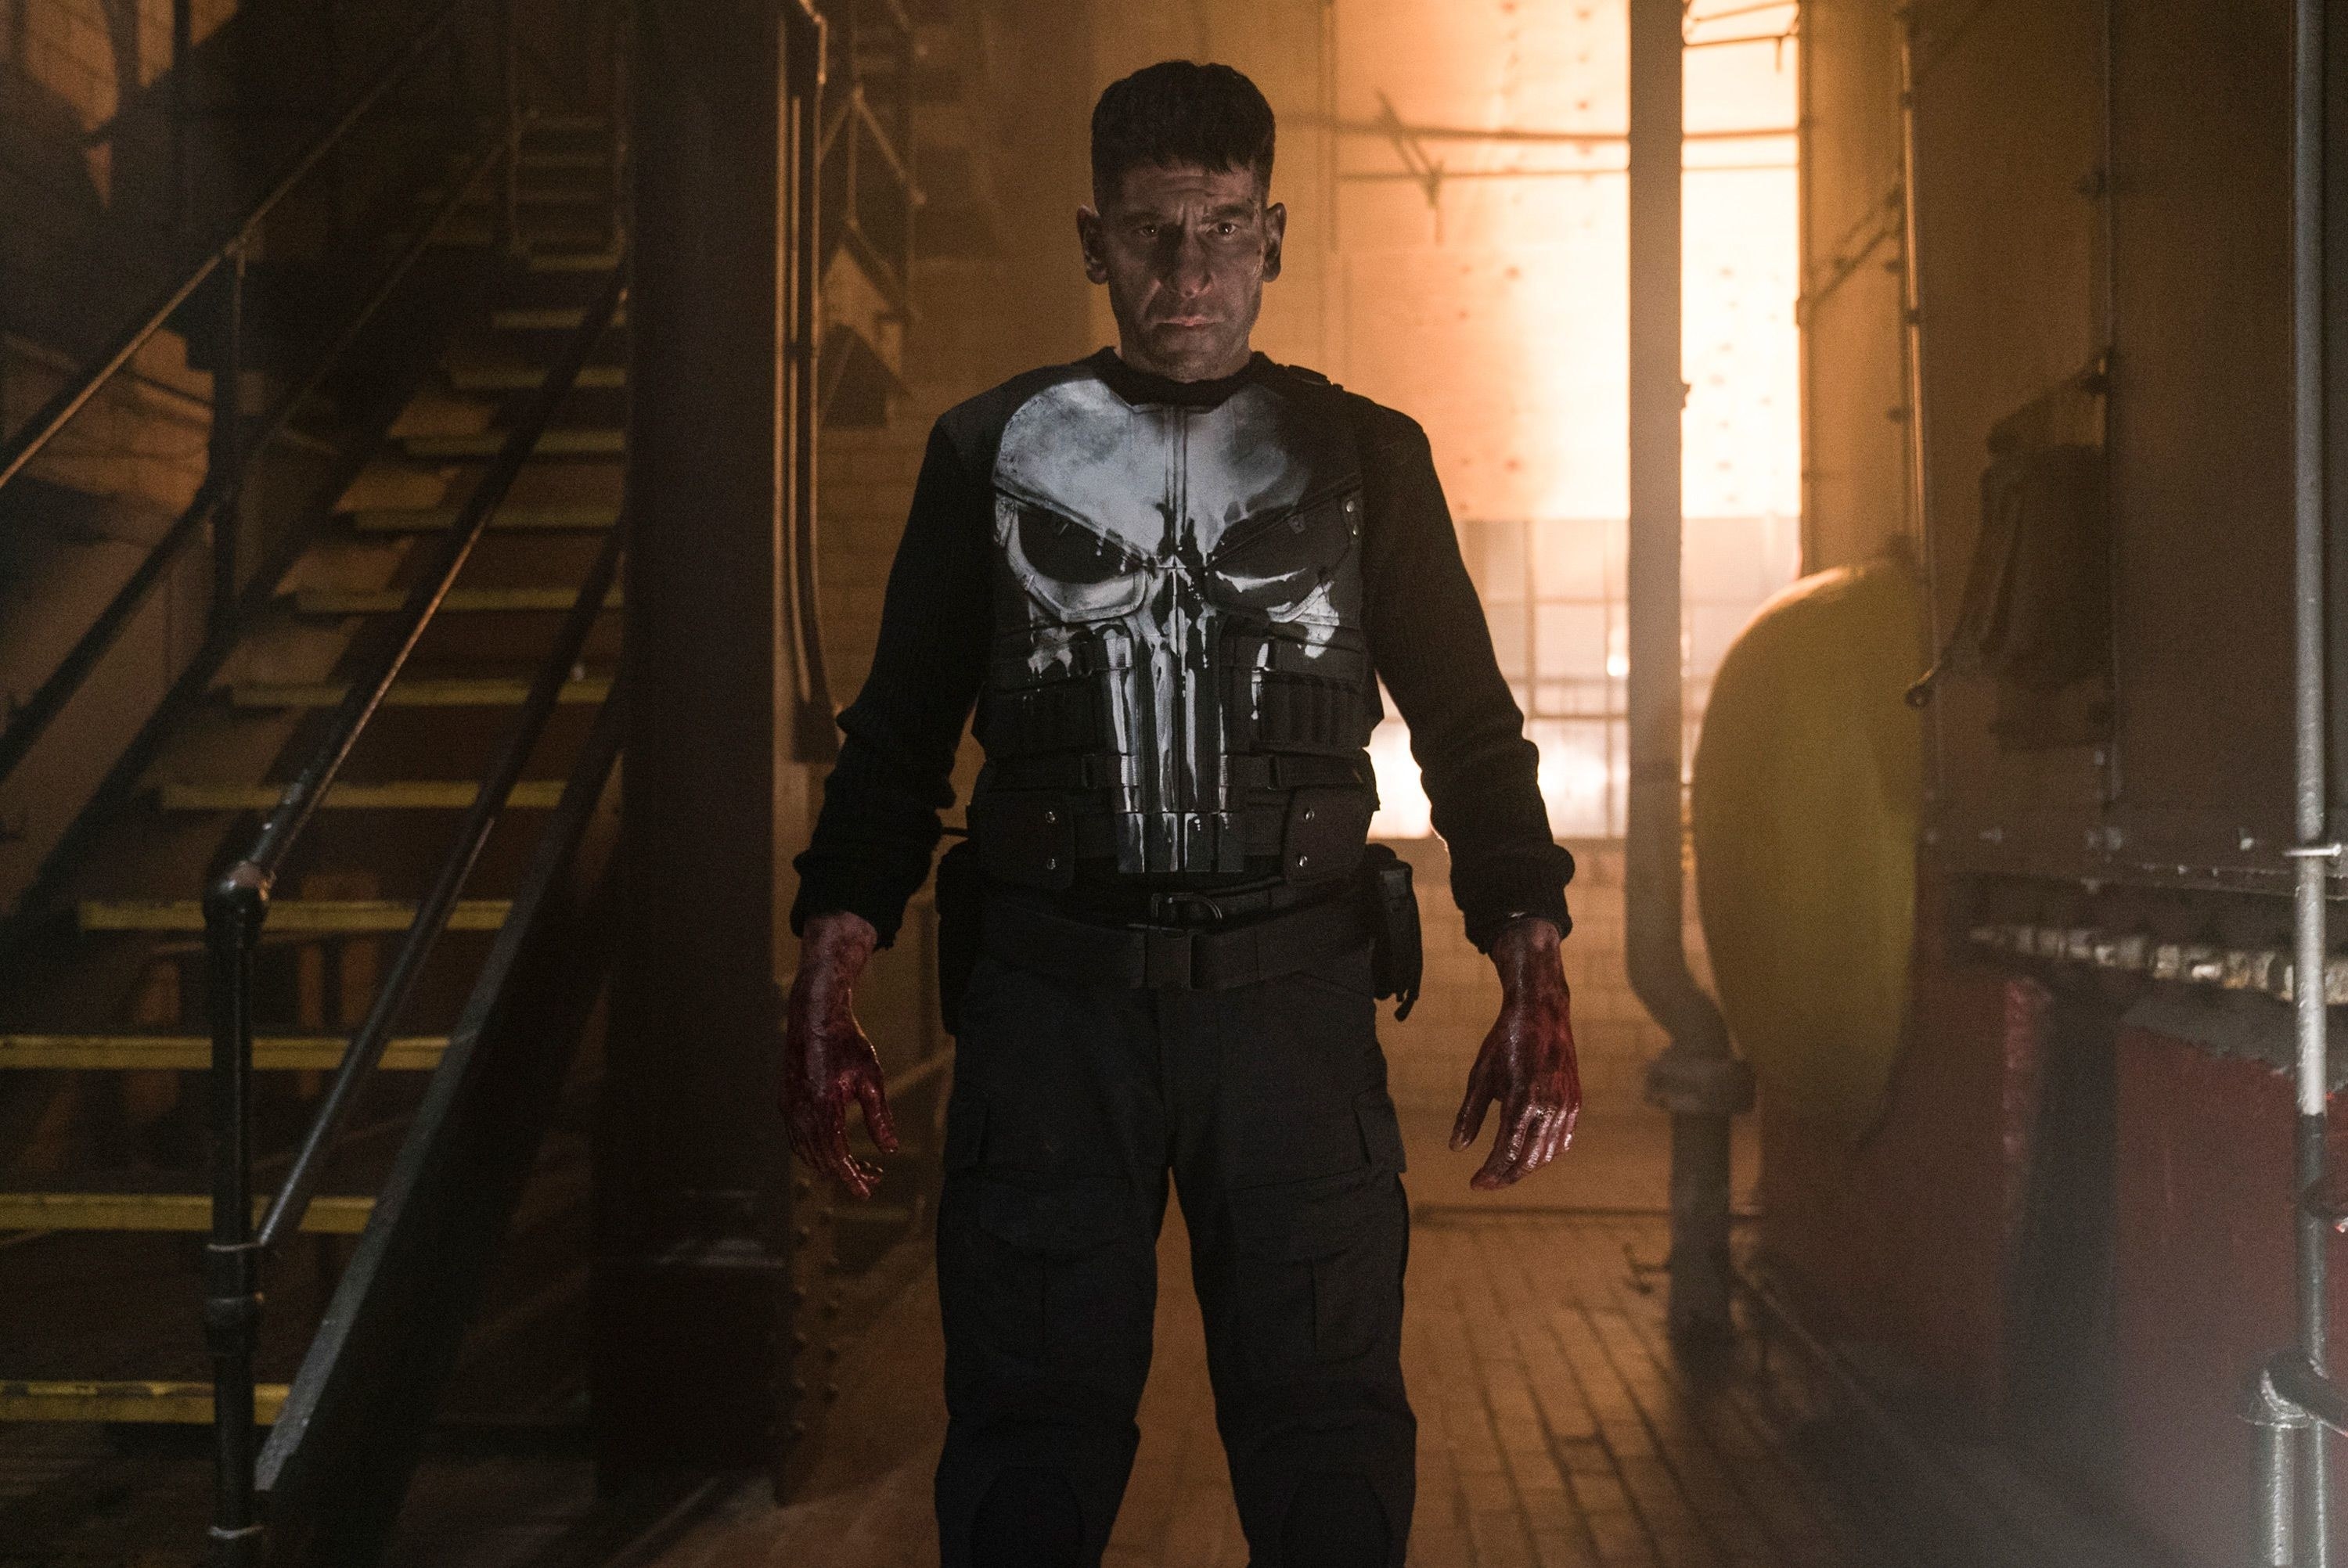 The Punisher standing next to some stairs, with blood on his hands